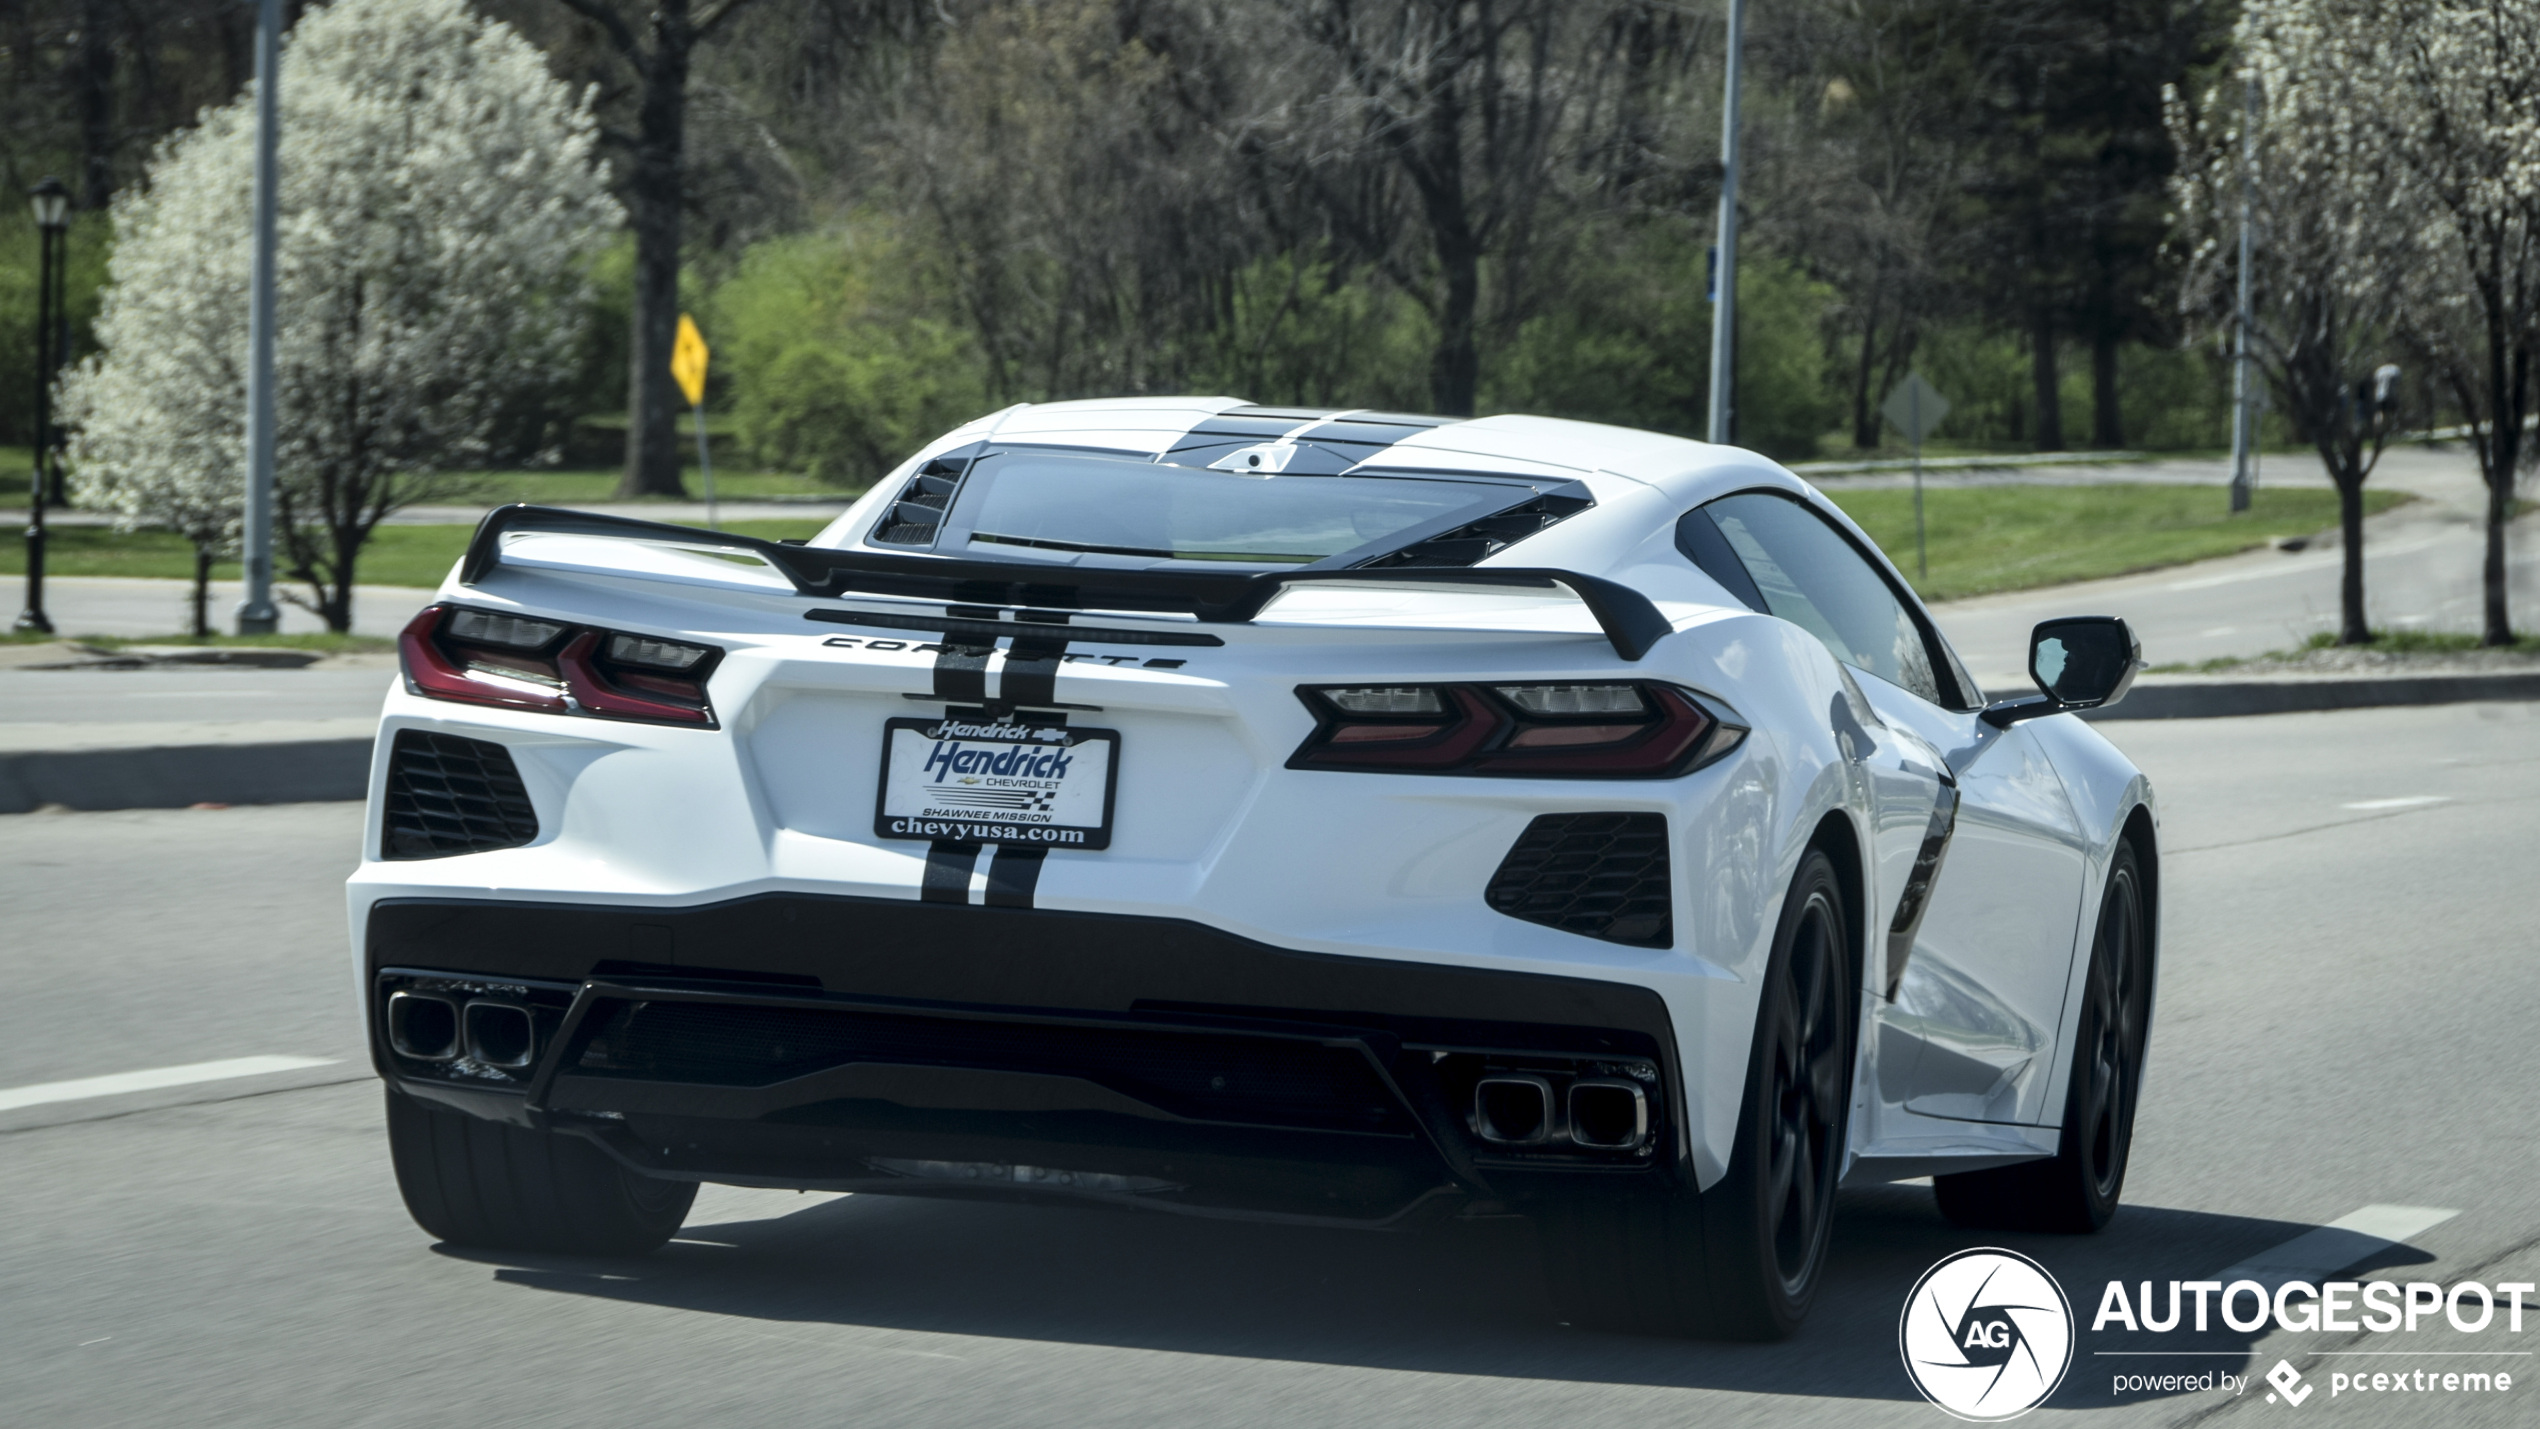 Spot of the day USA: Corvette C8 By OPspotters